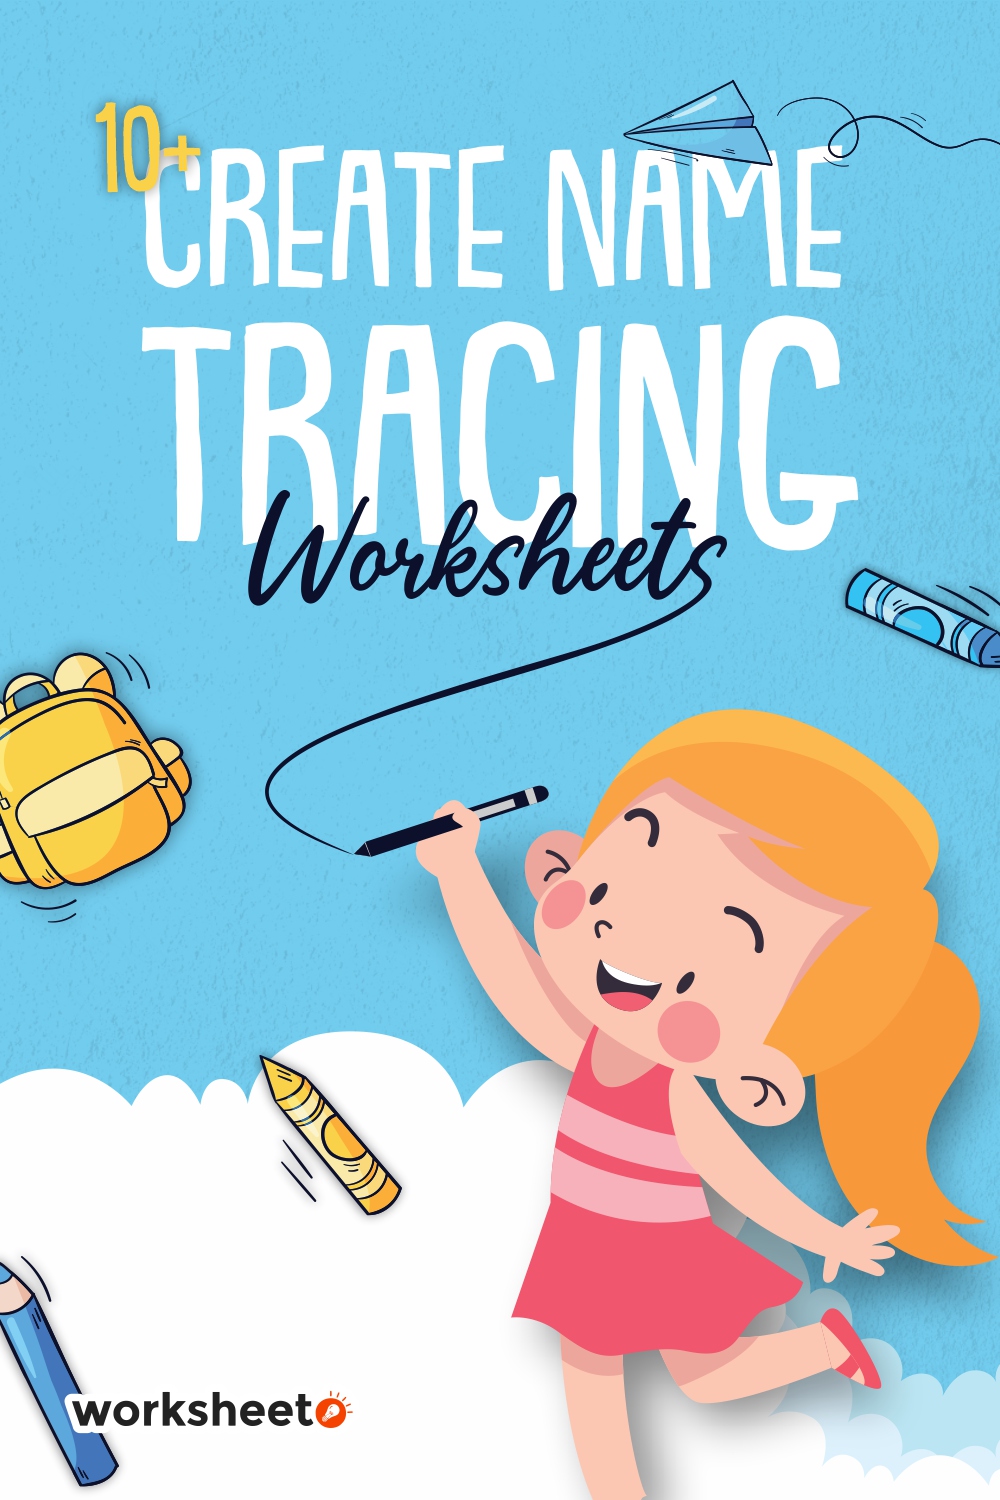 15 Images of Create Name Tracing Worksheets